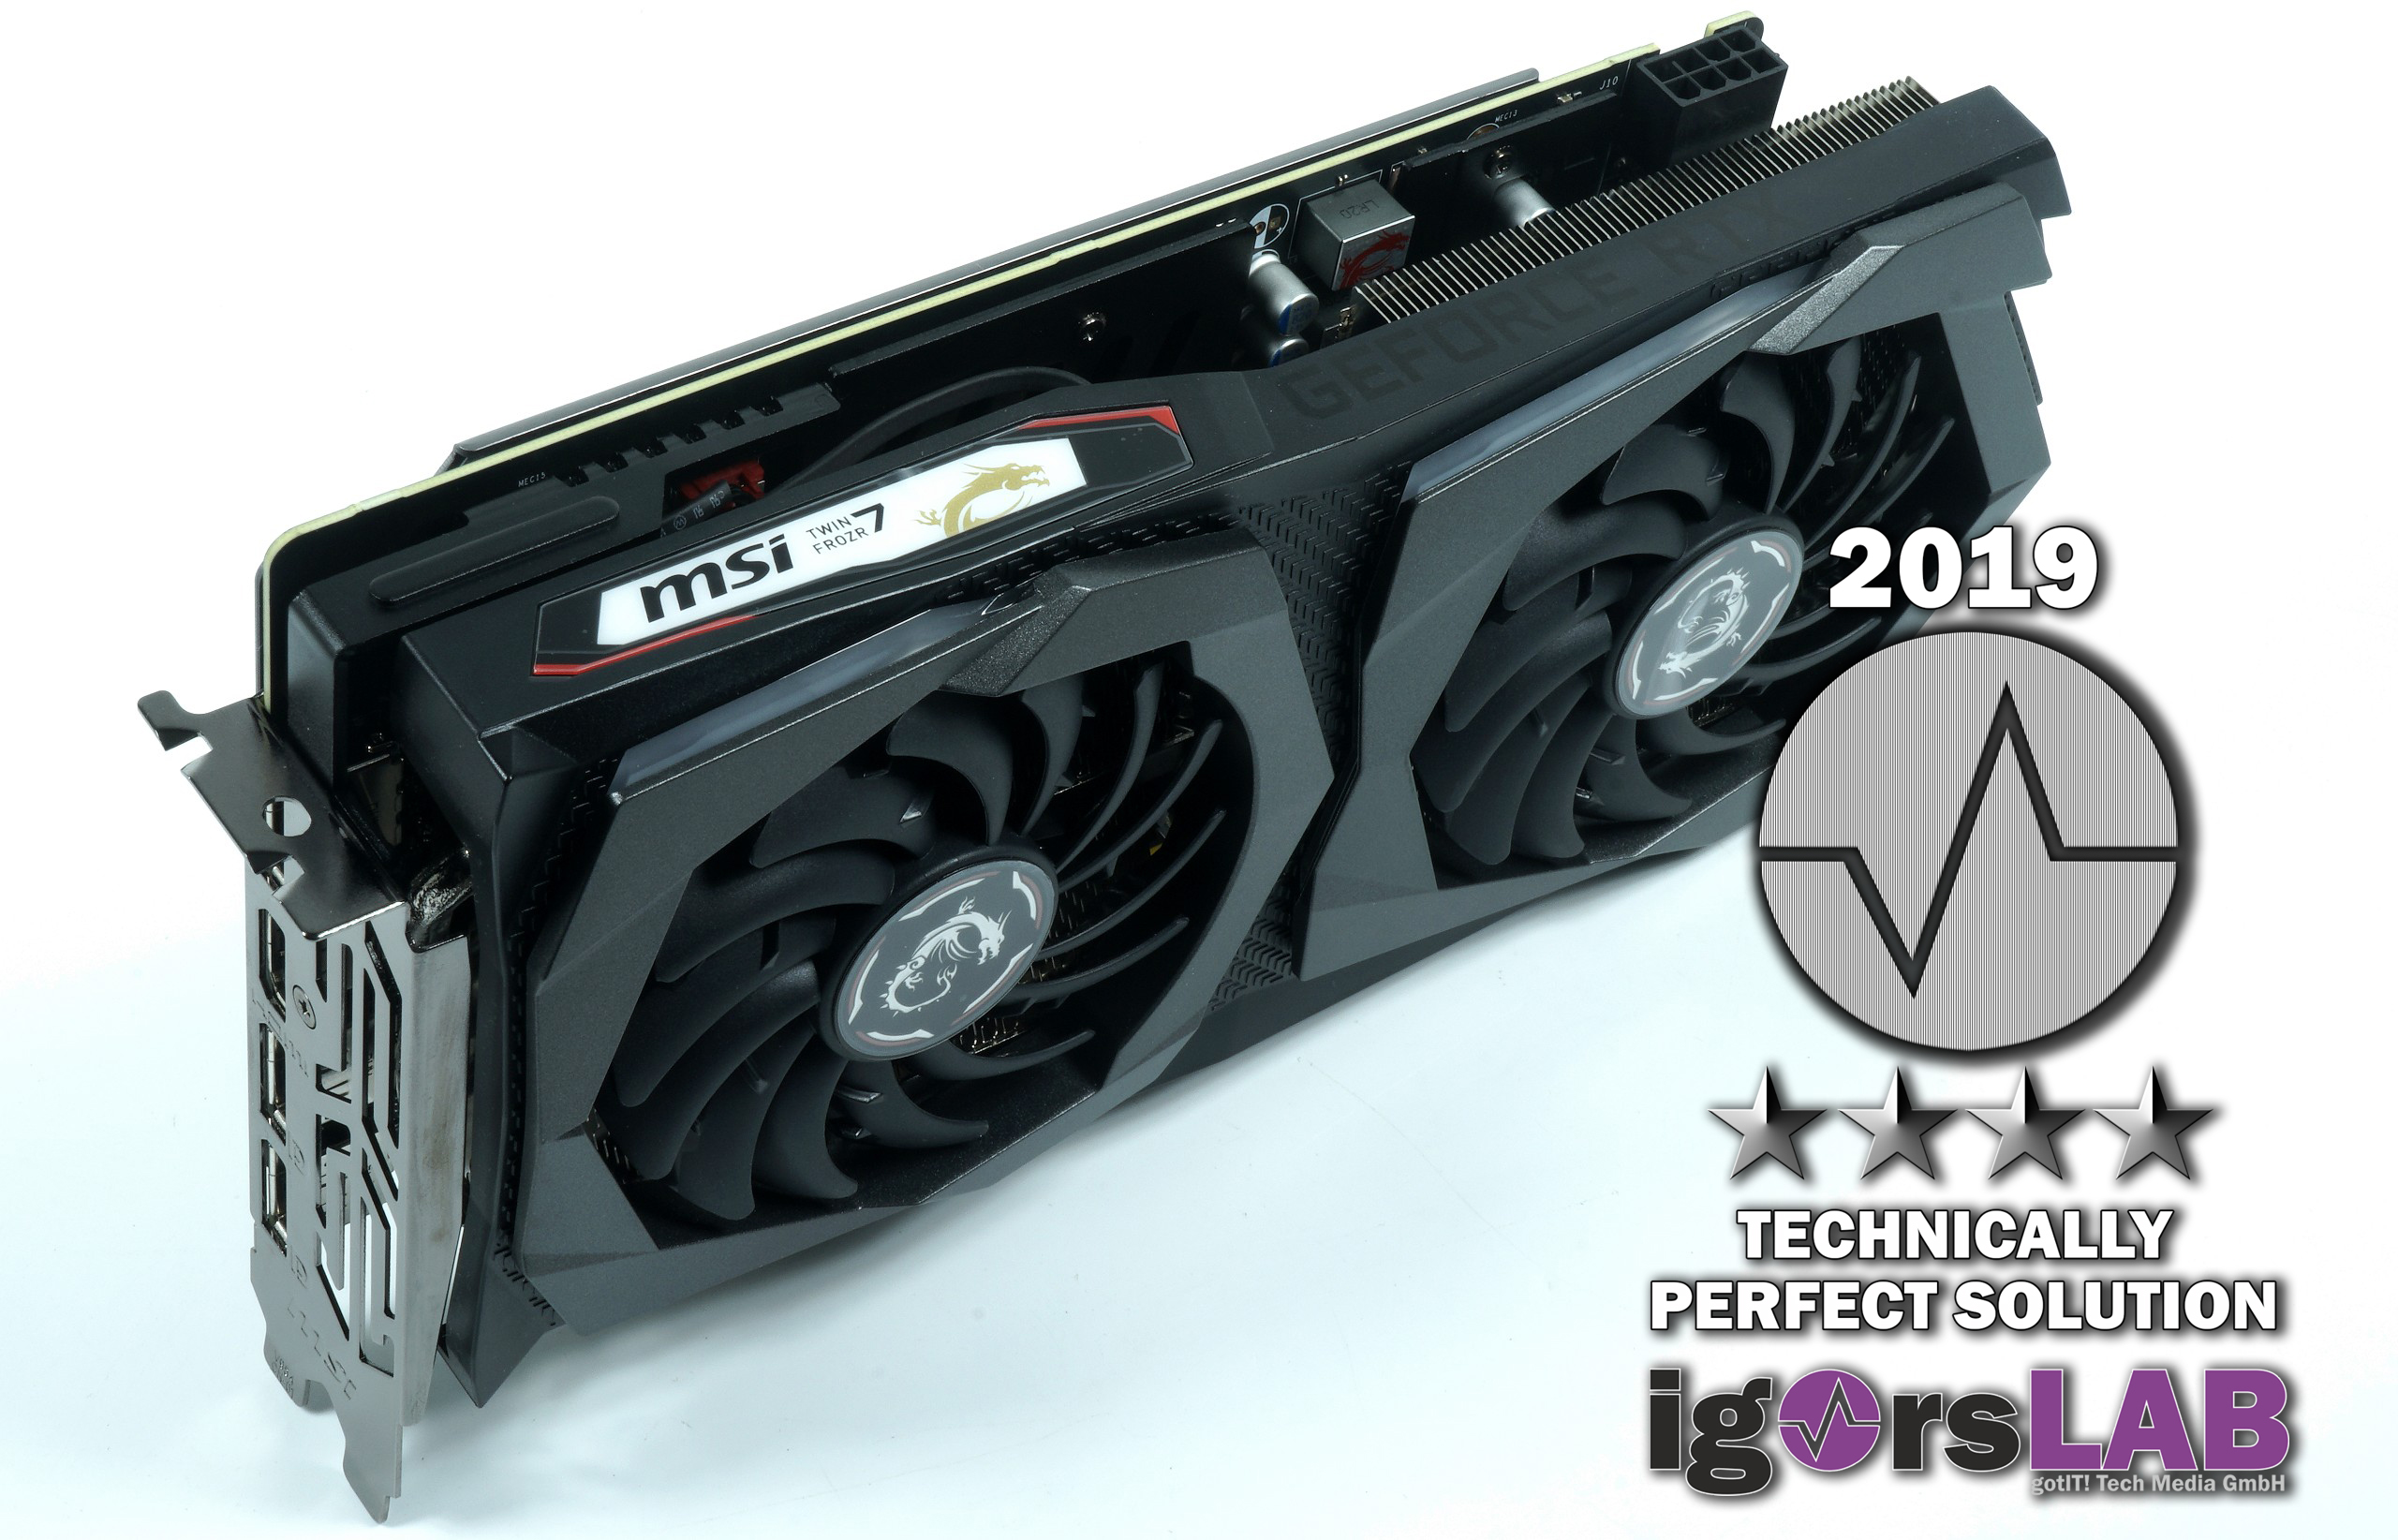 Prevented cannibal: MSI RTX 2060 Super Gaming X in review - quiet and cool Page 9 |